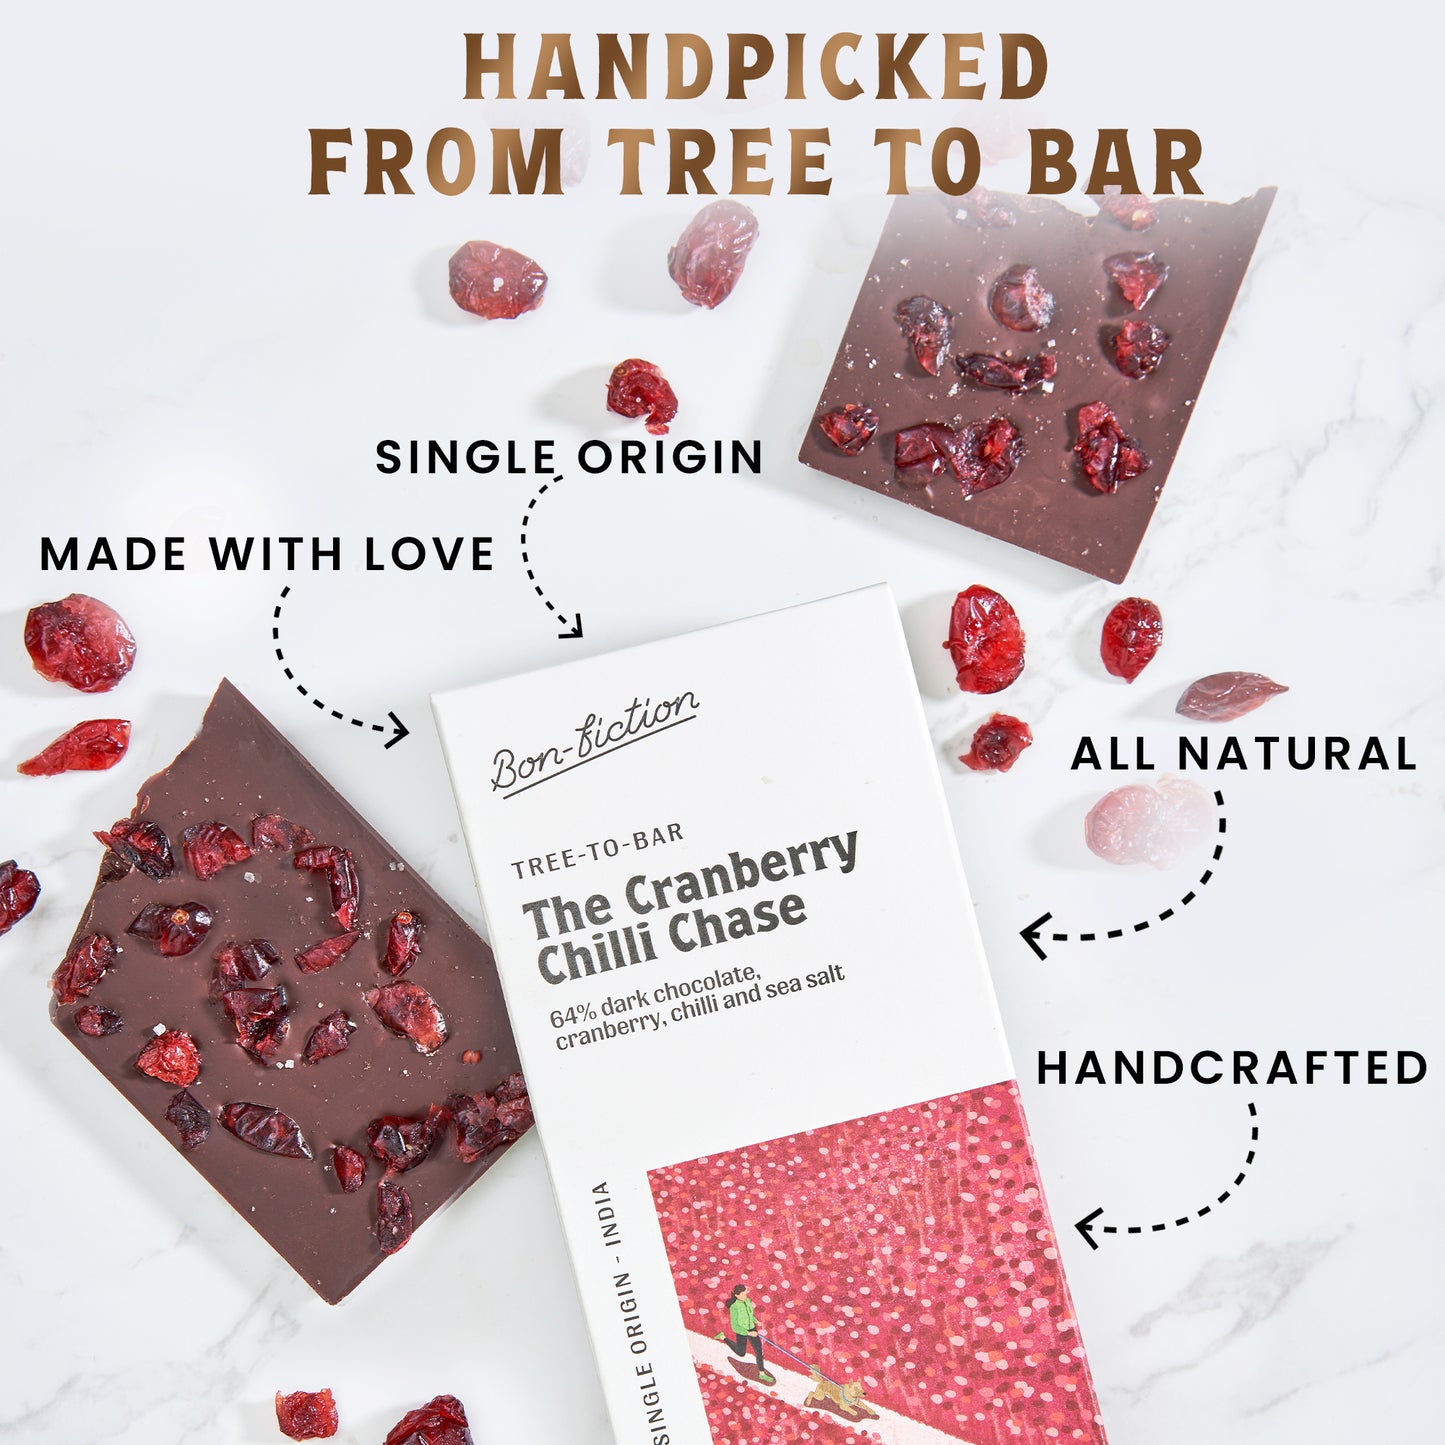 The Cranberry Chilli Chase - 64% Dark Cranberry Chilli Chocolate - Pack of 3